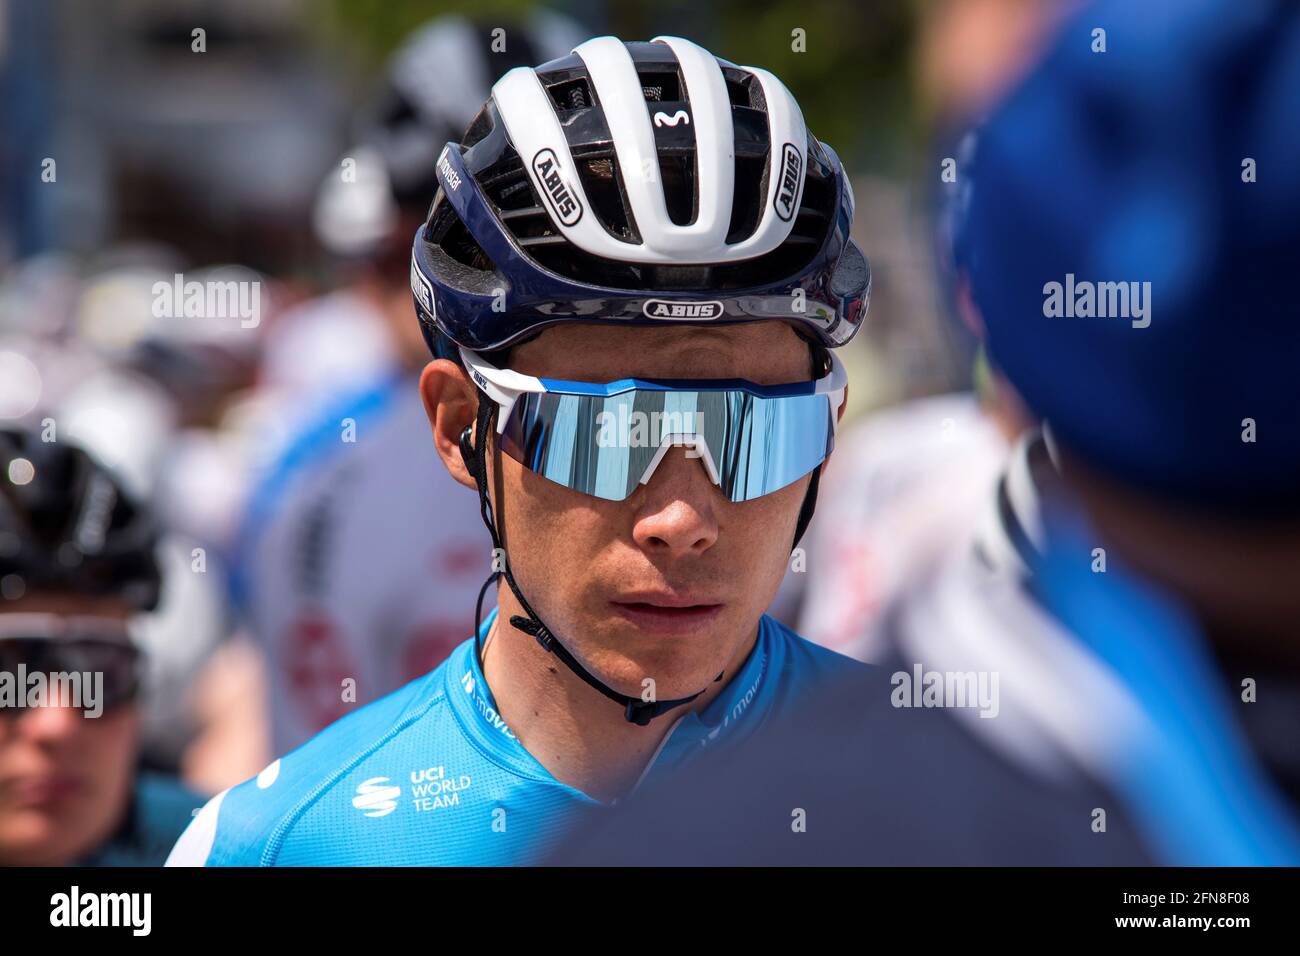 Deia, Spain. 14th May, 2021. Cyclist Miguel Angel Lopez, Movistar Team, is  seen at the start of the third stage of the 30th Challenge Ciclista  Mallorca cycling race in Andratx, Majorca island,